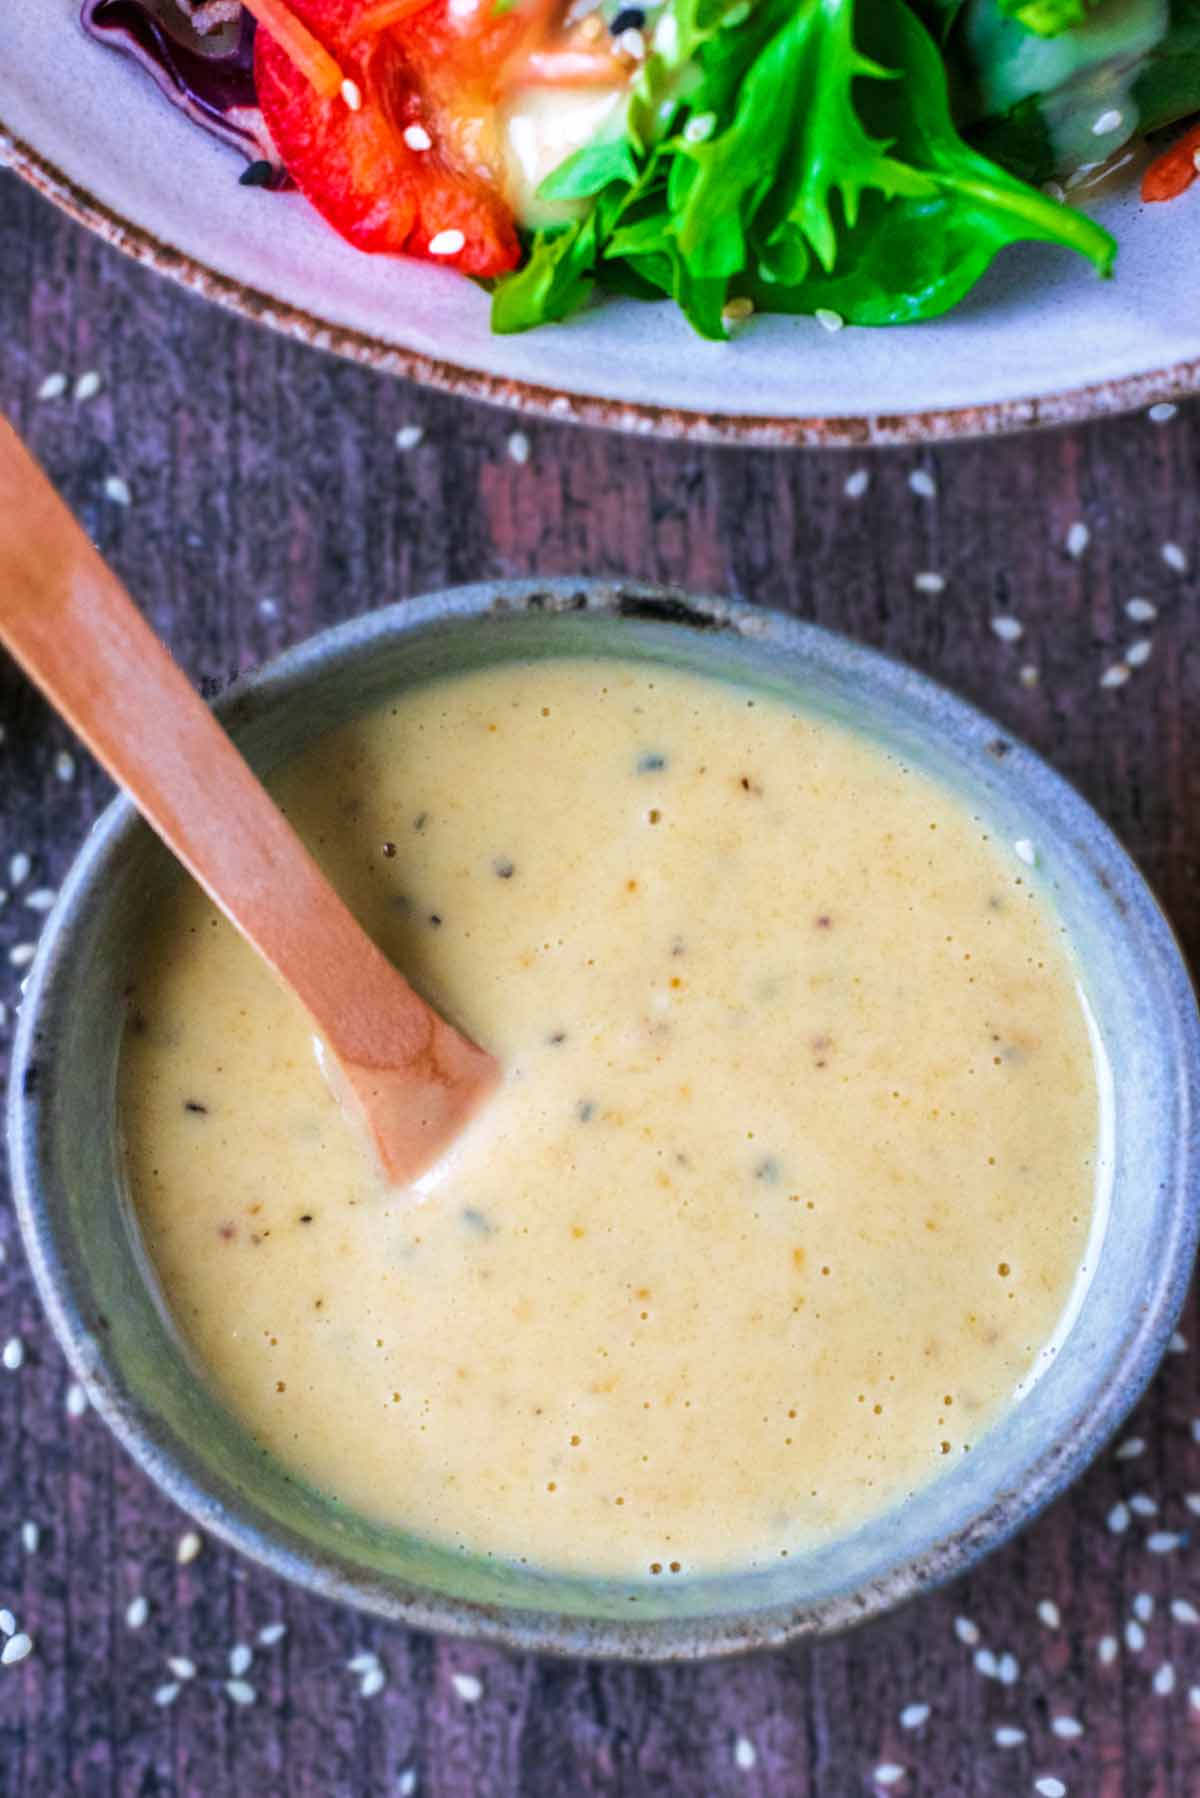 A creamy salad dressing in a small bowl with a spoon.